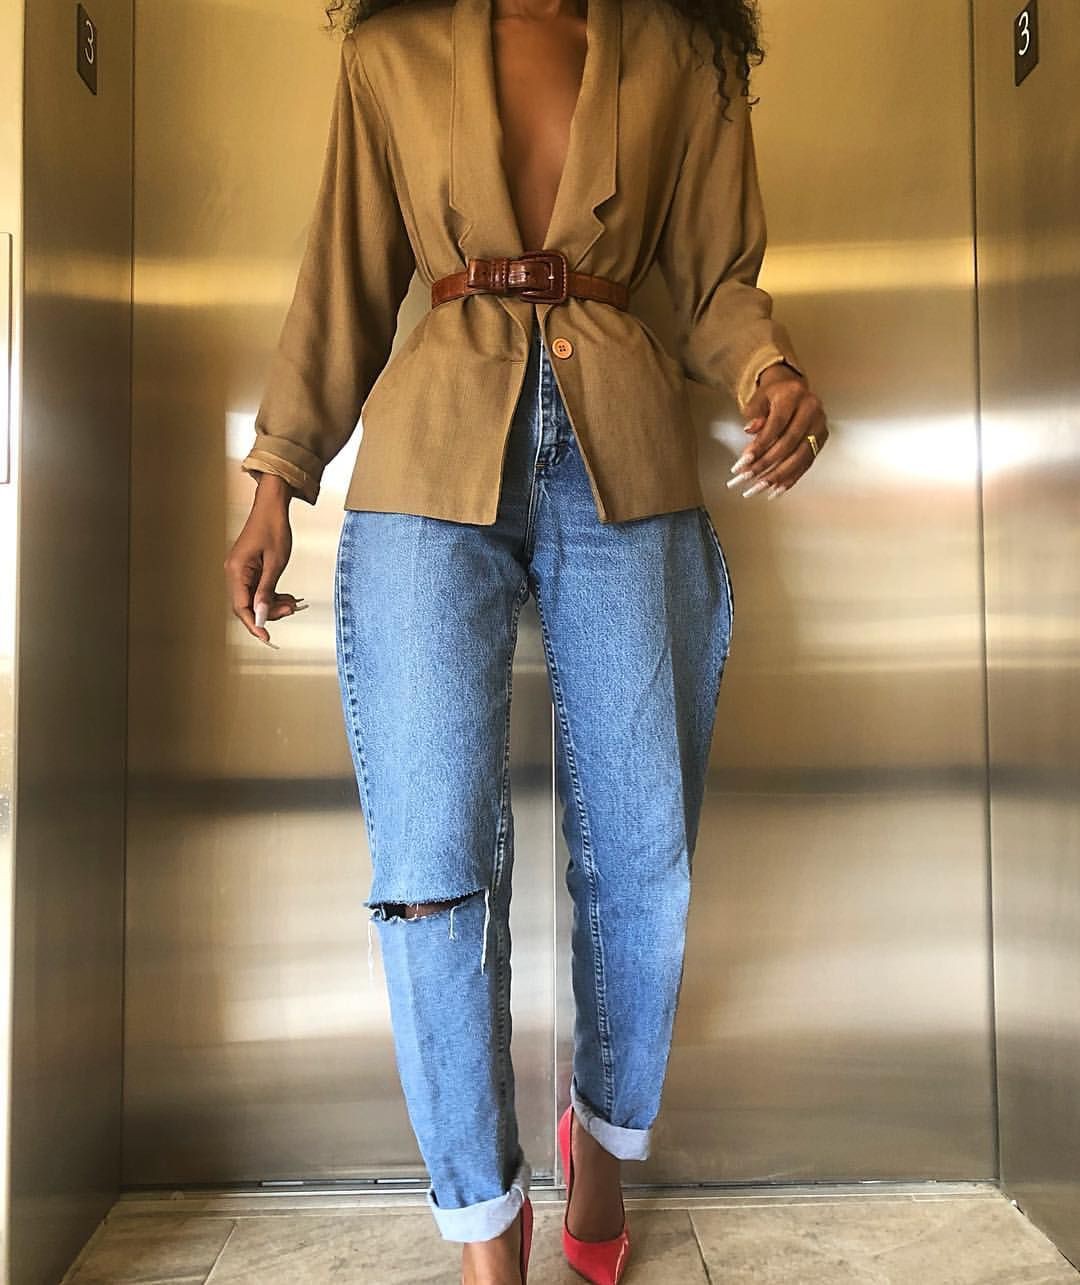 Random&Chic Vintage on Instagram: “Nothing better than a pop of pink? Shop this blazer by clicking link in bio” | Summer Outfit Ideas 2020: Outfit Ideas,  summer outfits,  Instagram,  Vintage clothing,  Pink  